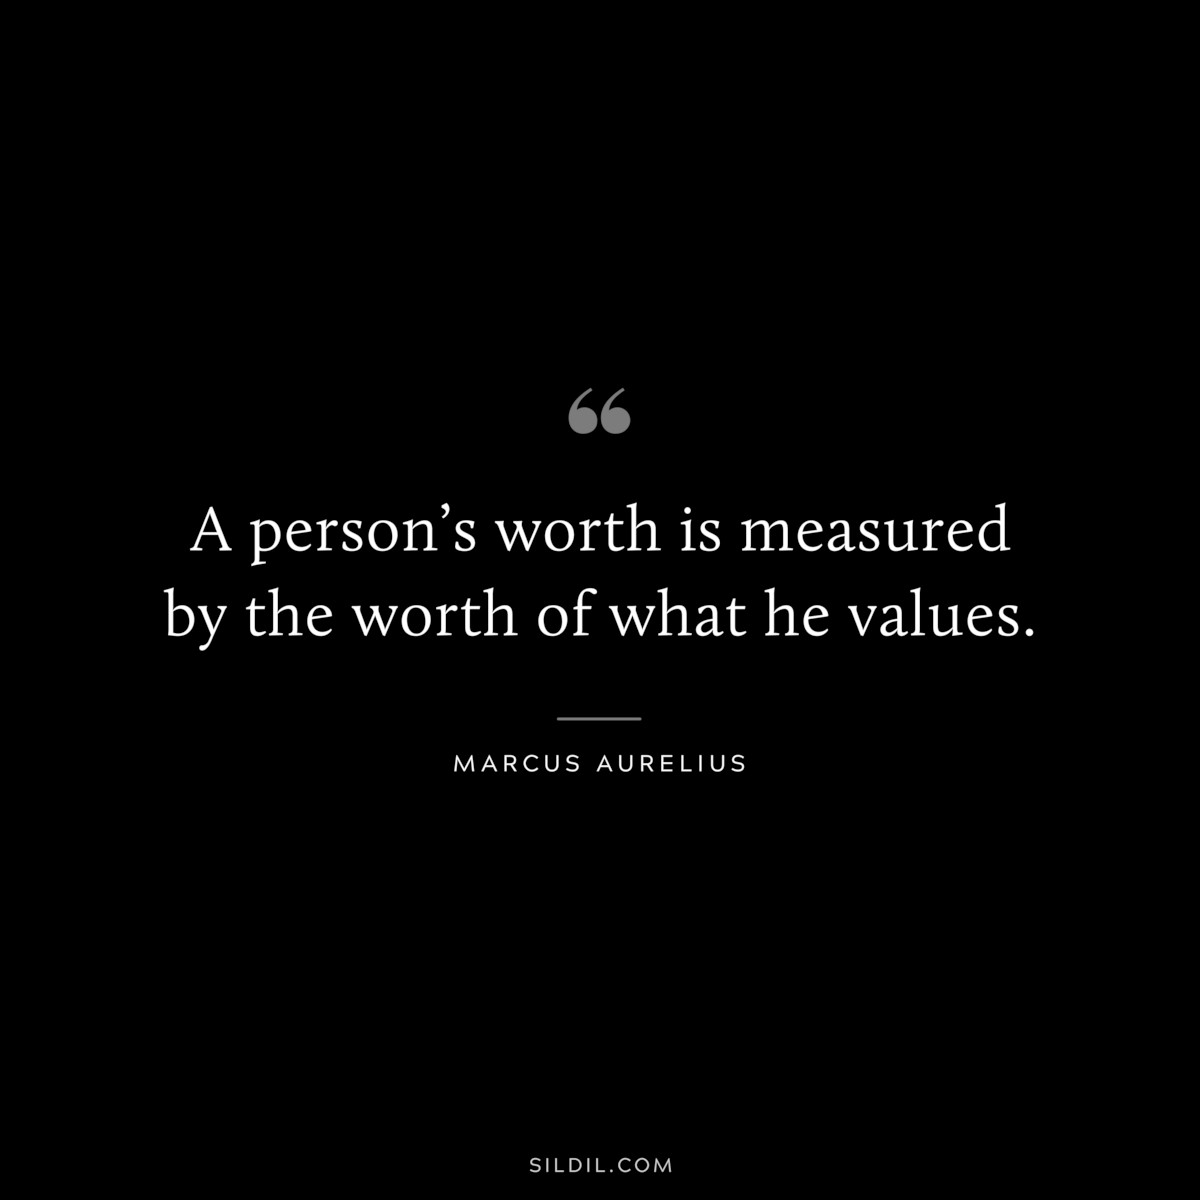 A person’s worth is measured by the worth of what he values. ― Marcus Aurelius